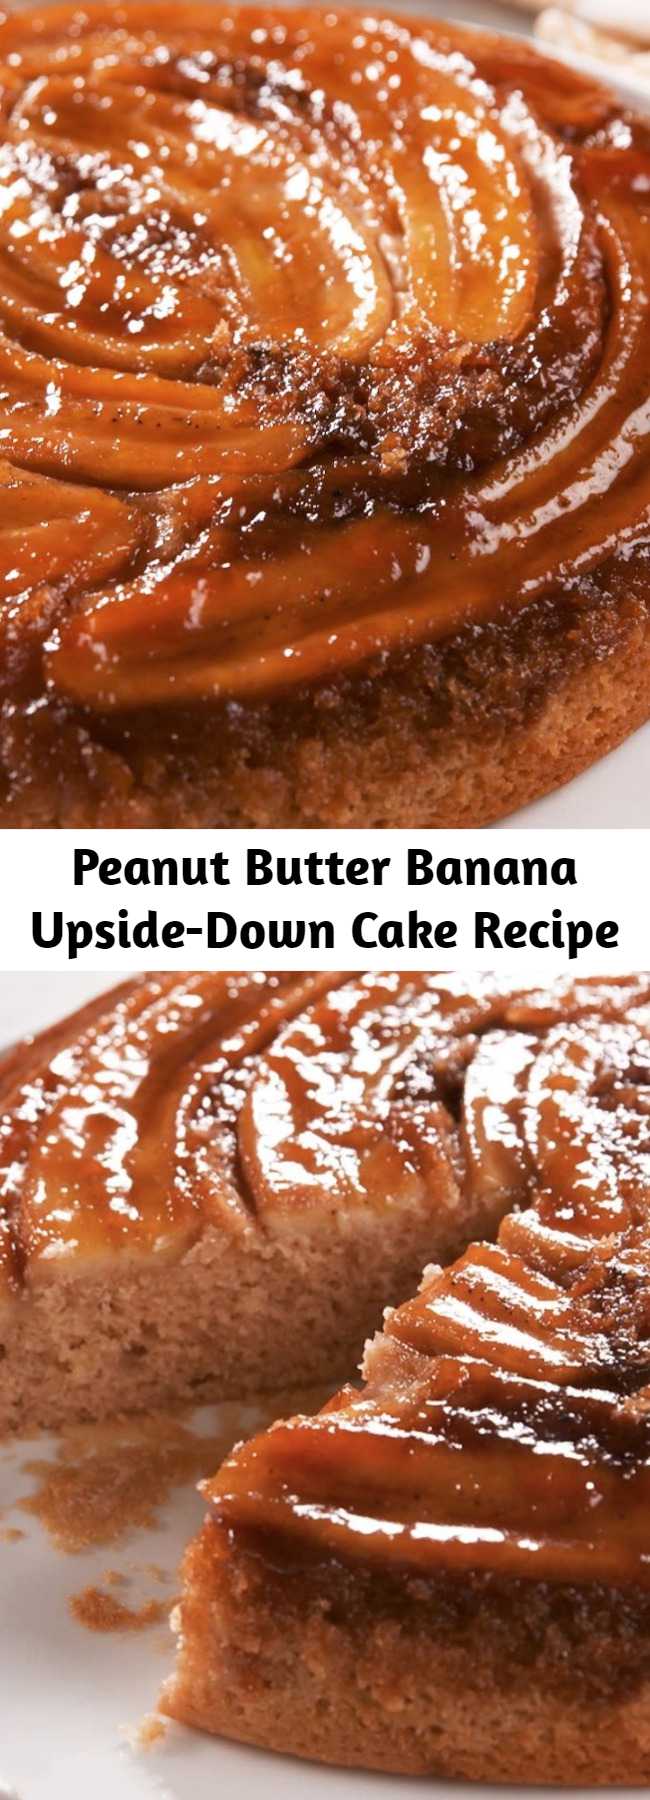 Peanut Butter Banana Upside-Down Cake Recipe - Wow the crowd with this warm, caramelized Peanut Butter & Banana Upside-Down Cake. #recipe #easy #easyrecipes #peanut #butter #peanutbutter #banana #cake #baking #dessert